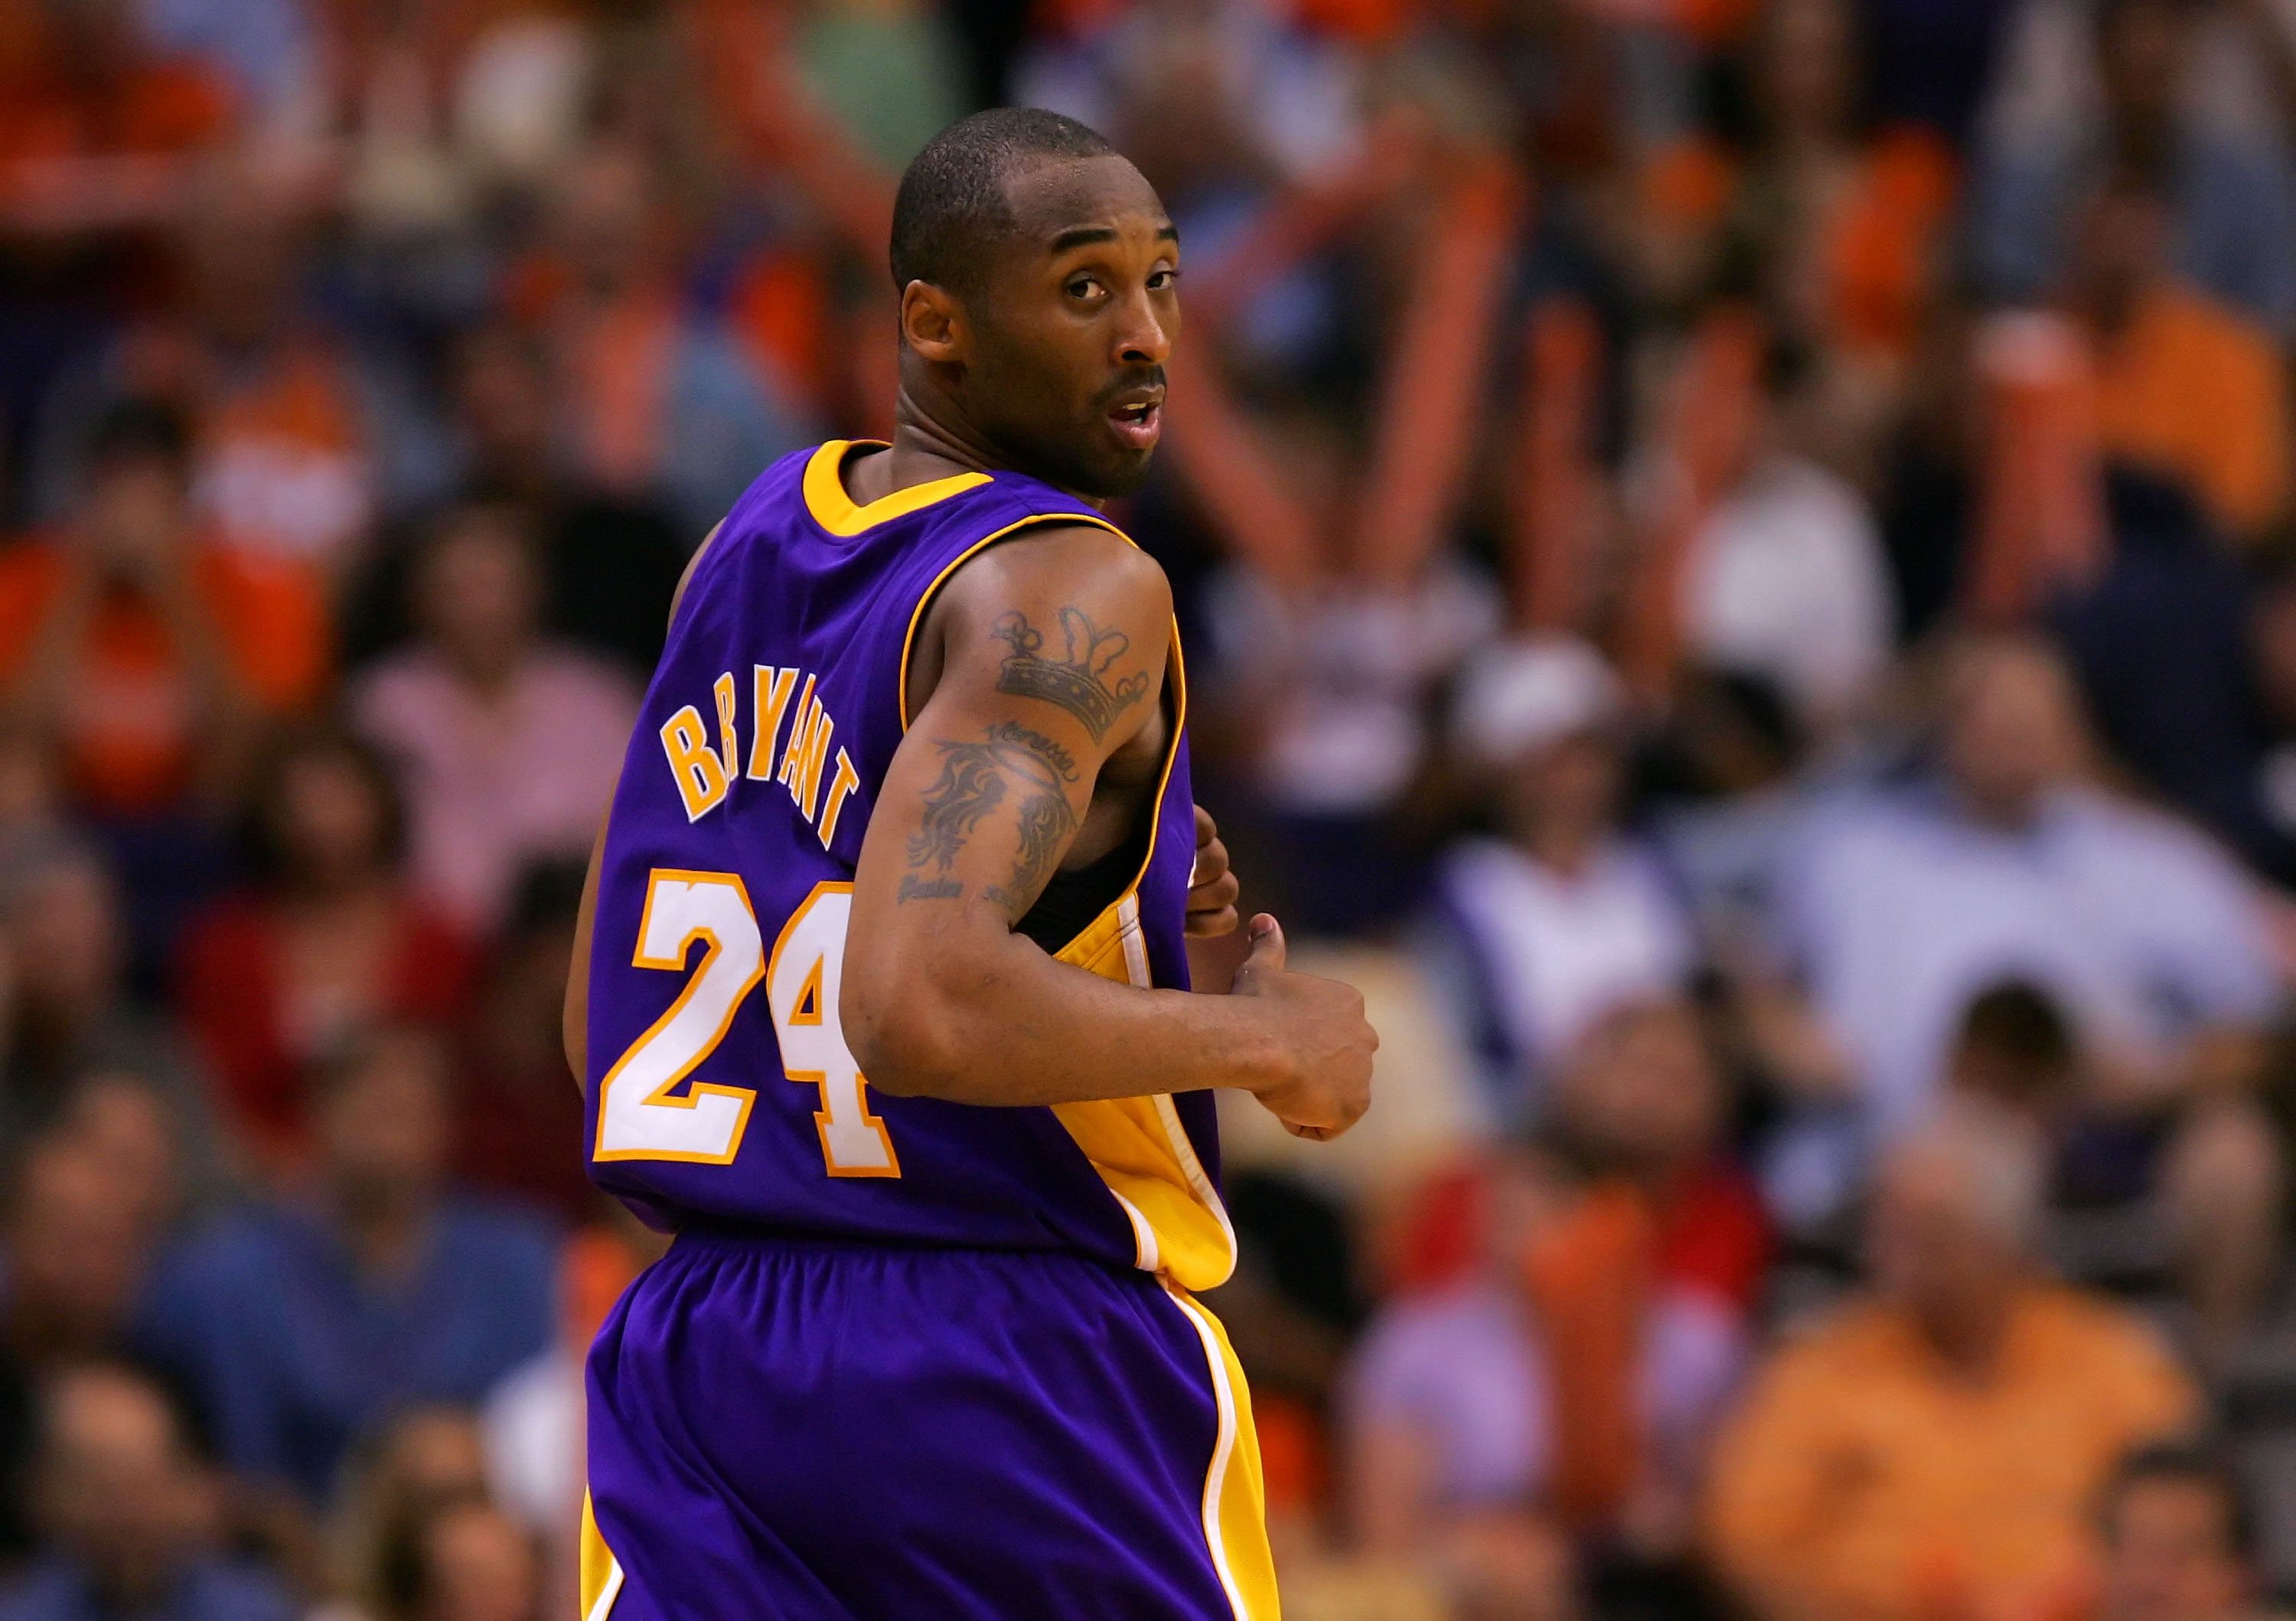 Kobe Bryant during the 2007 NBA Playoffs at US Airways Center in May 2007. | Photo: Getty Images